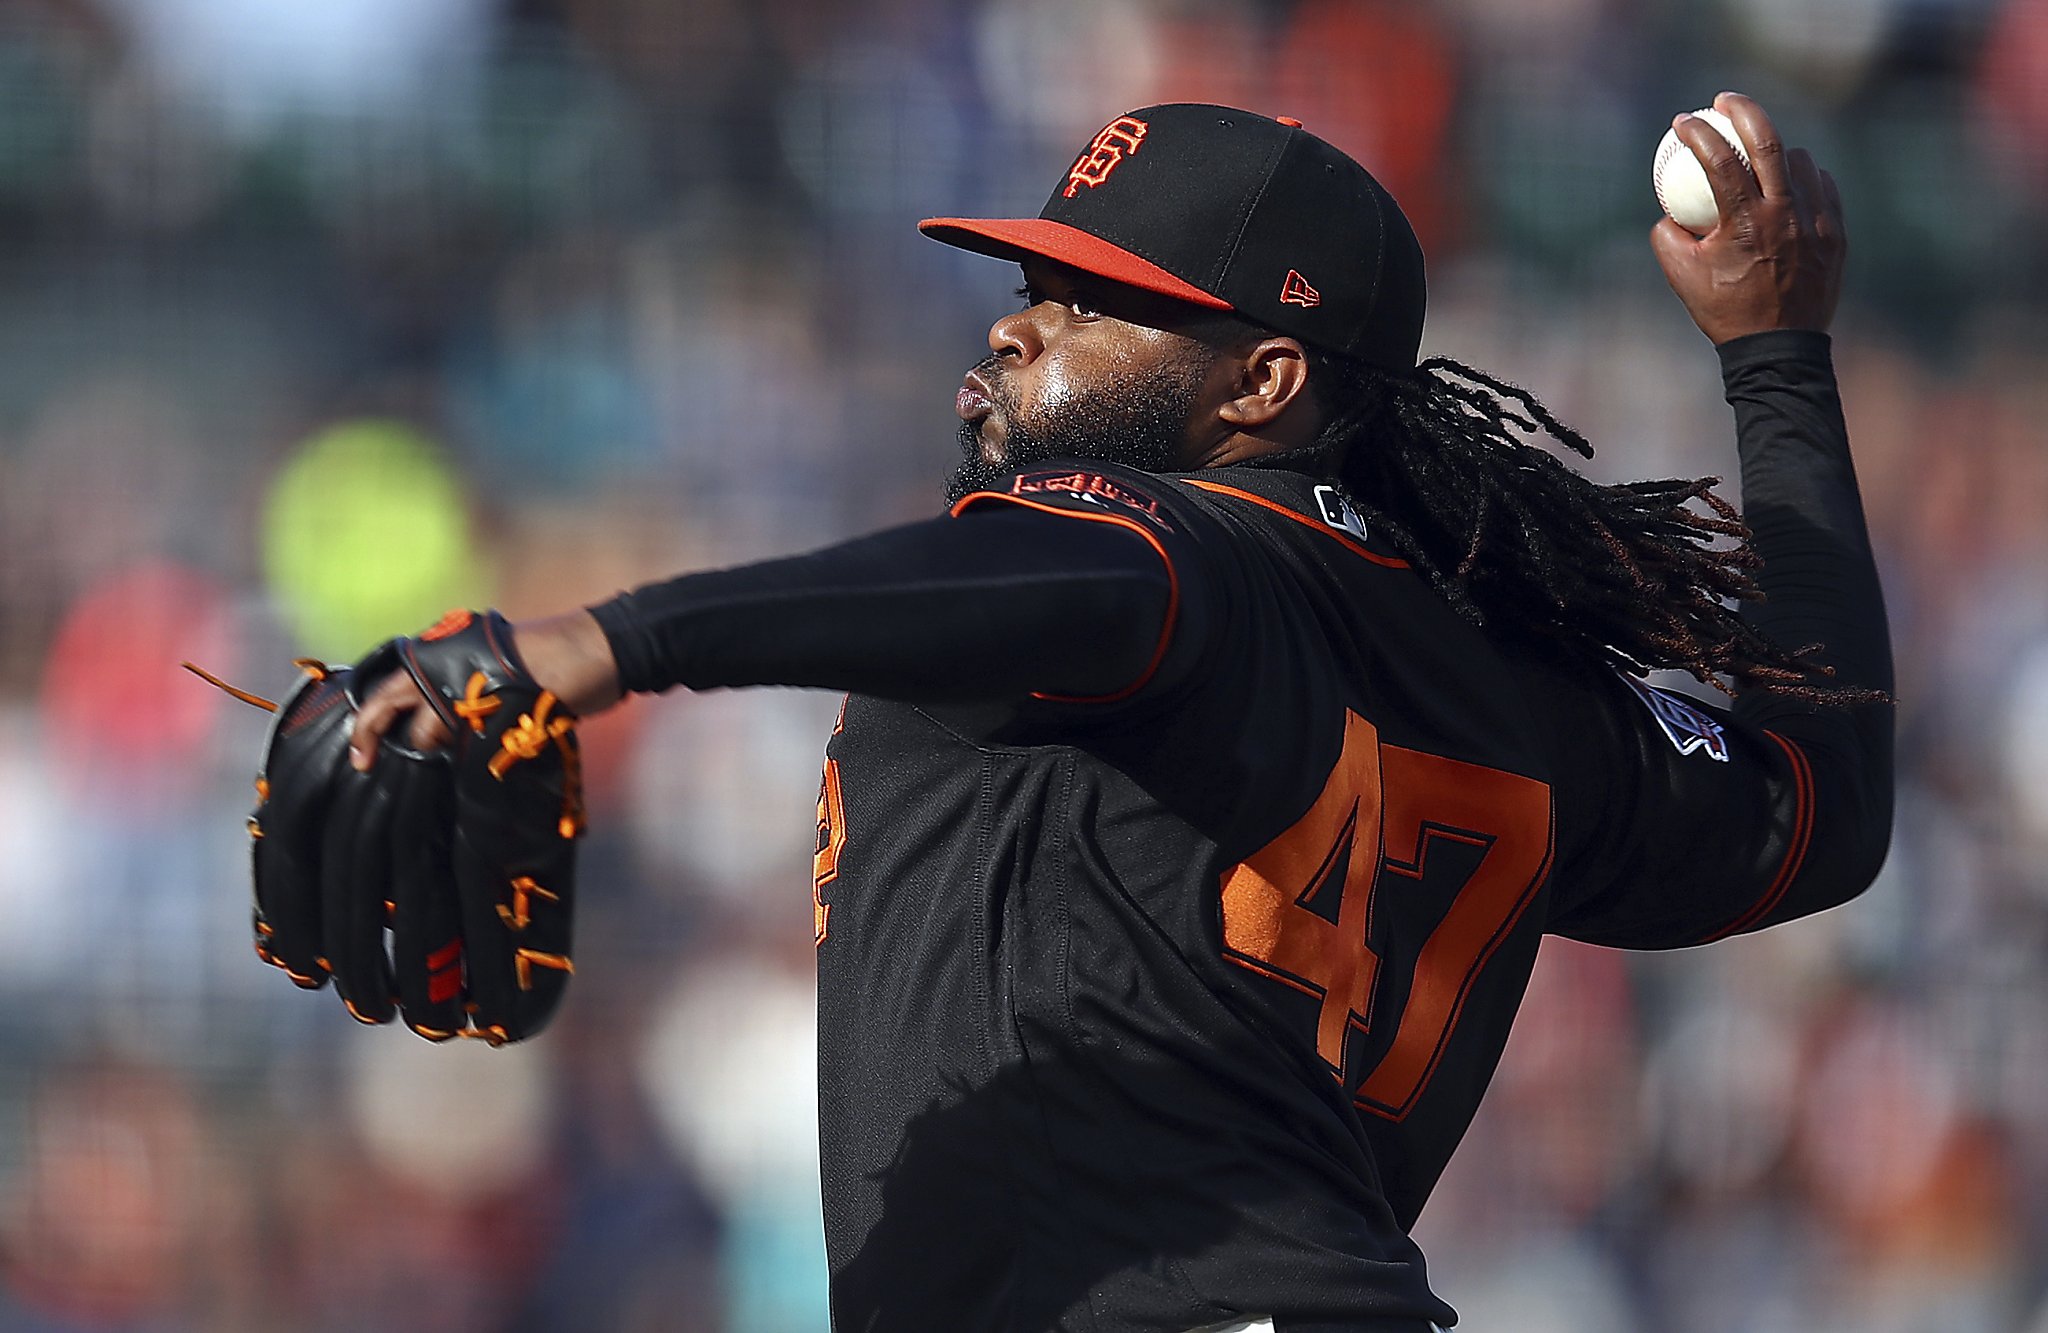 Johnny Cueto of the San Francisco Giants pitches against the Oakland